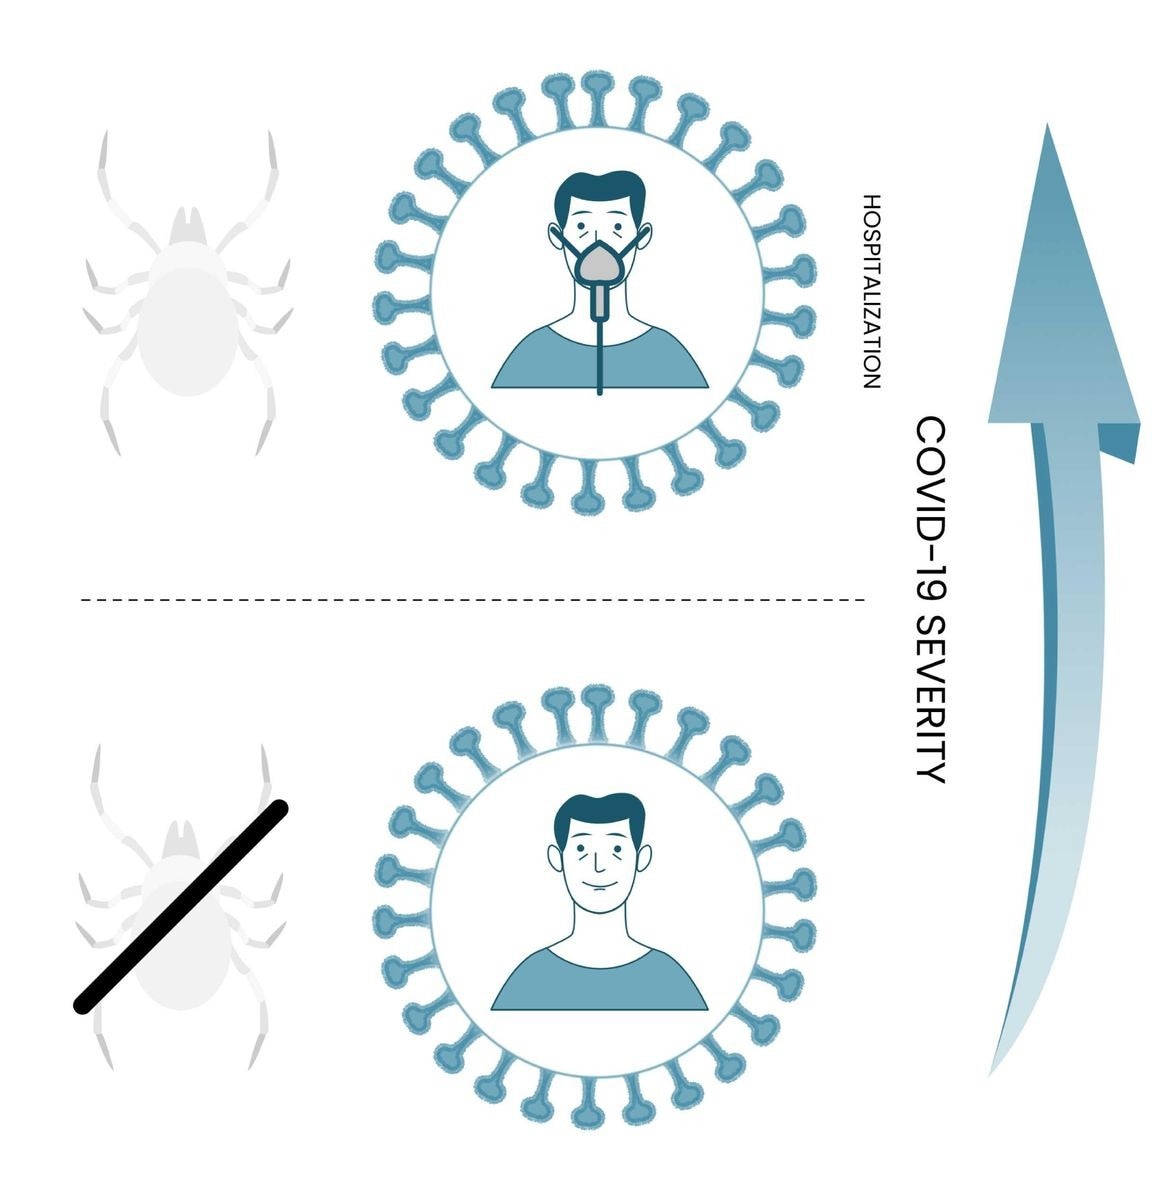 Risks in COVID-19 are linked to a history of tick bites and related infections.